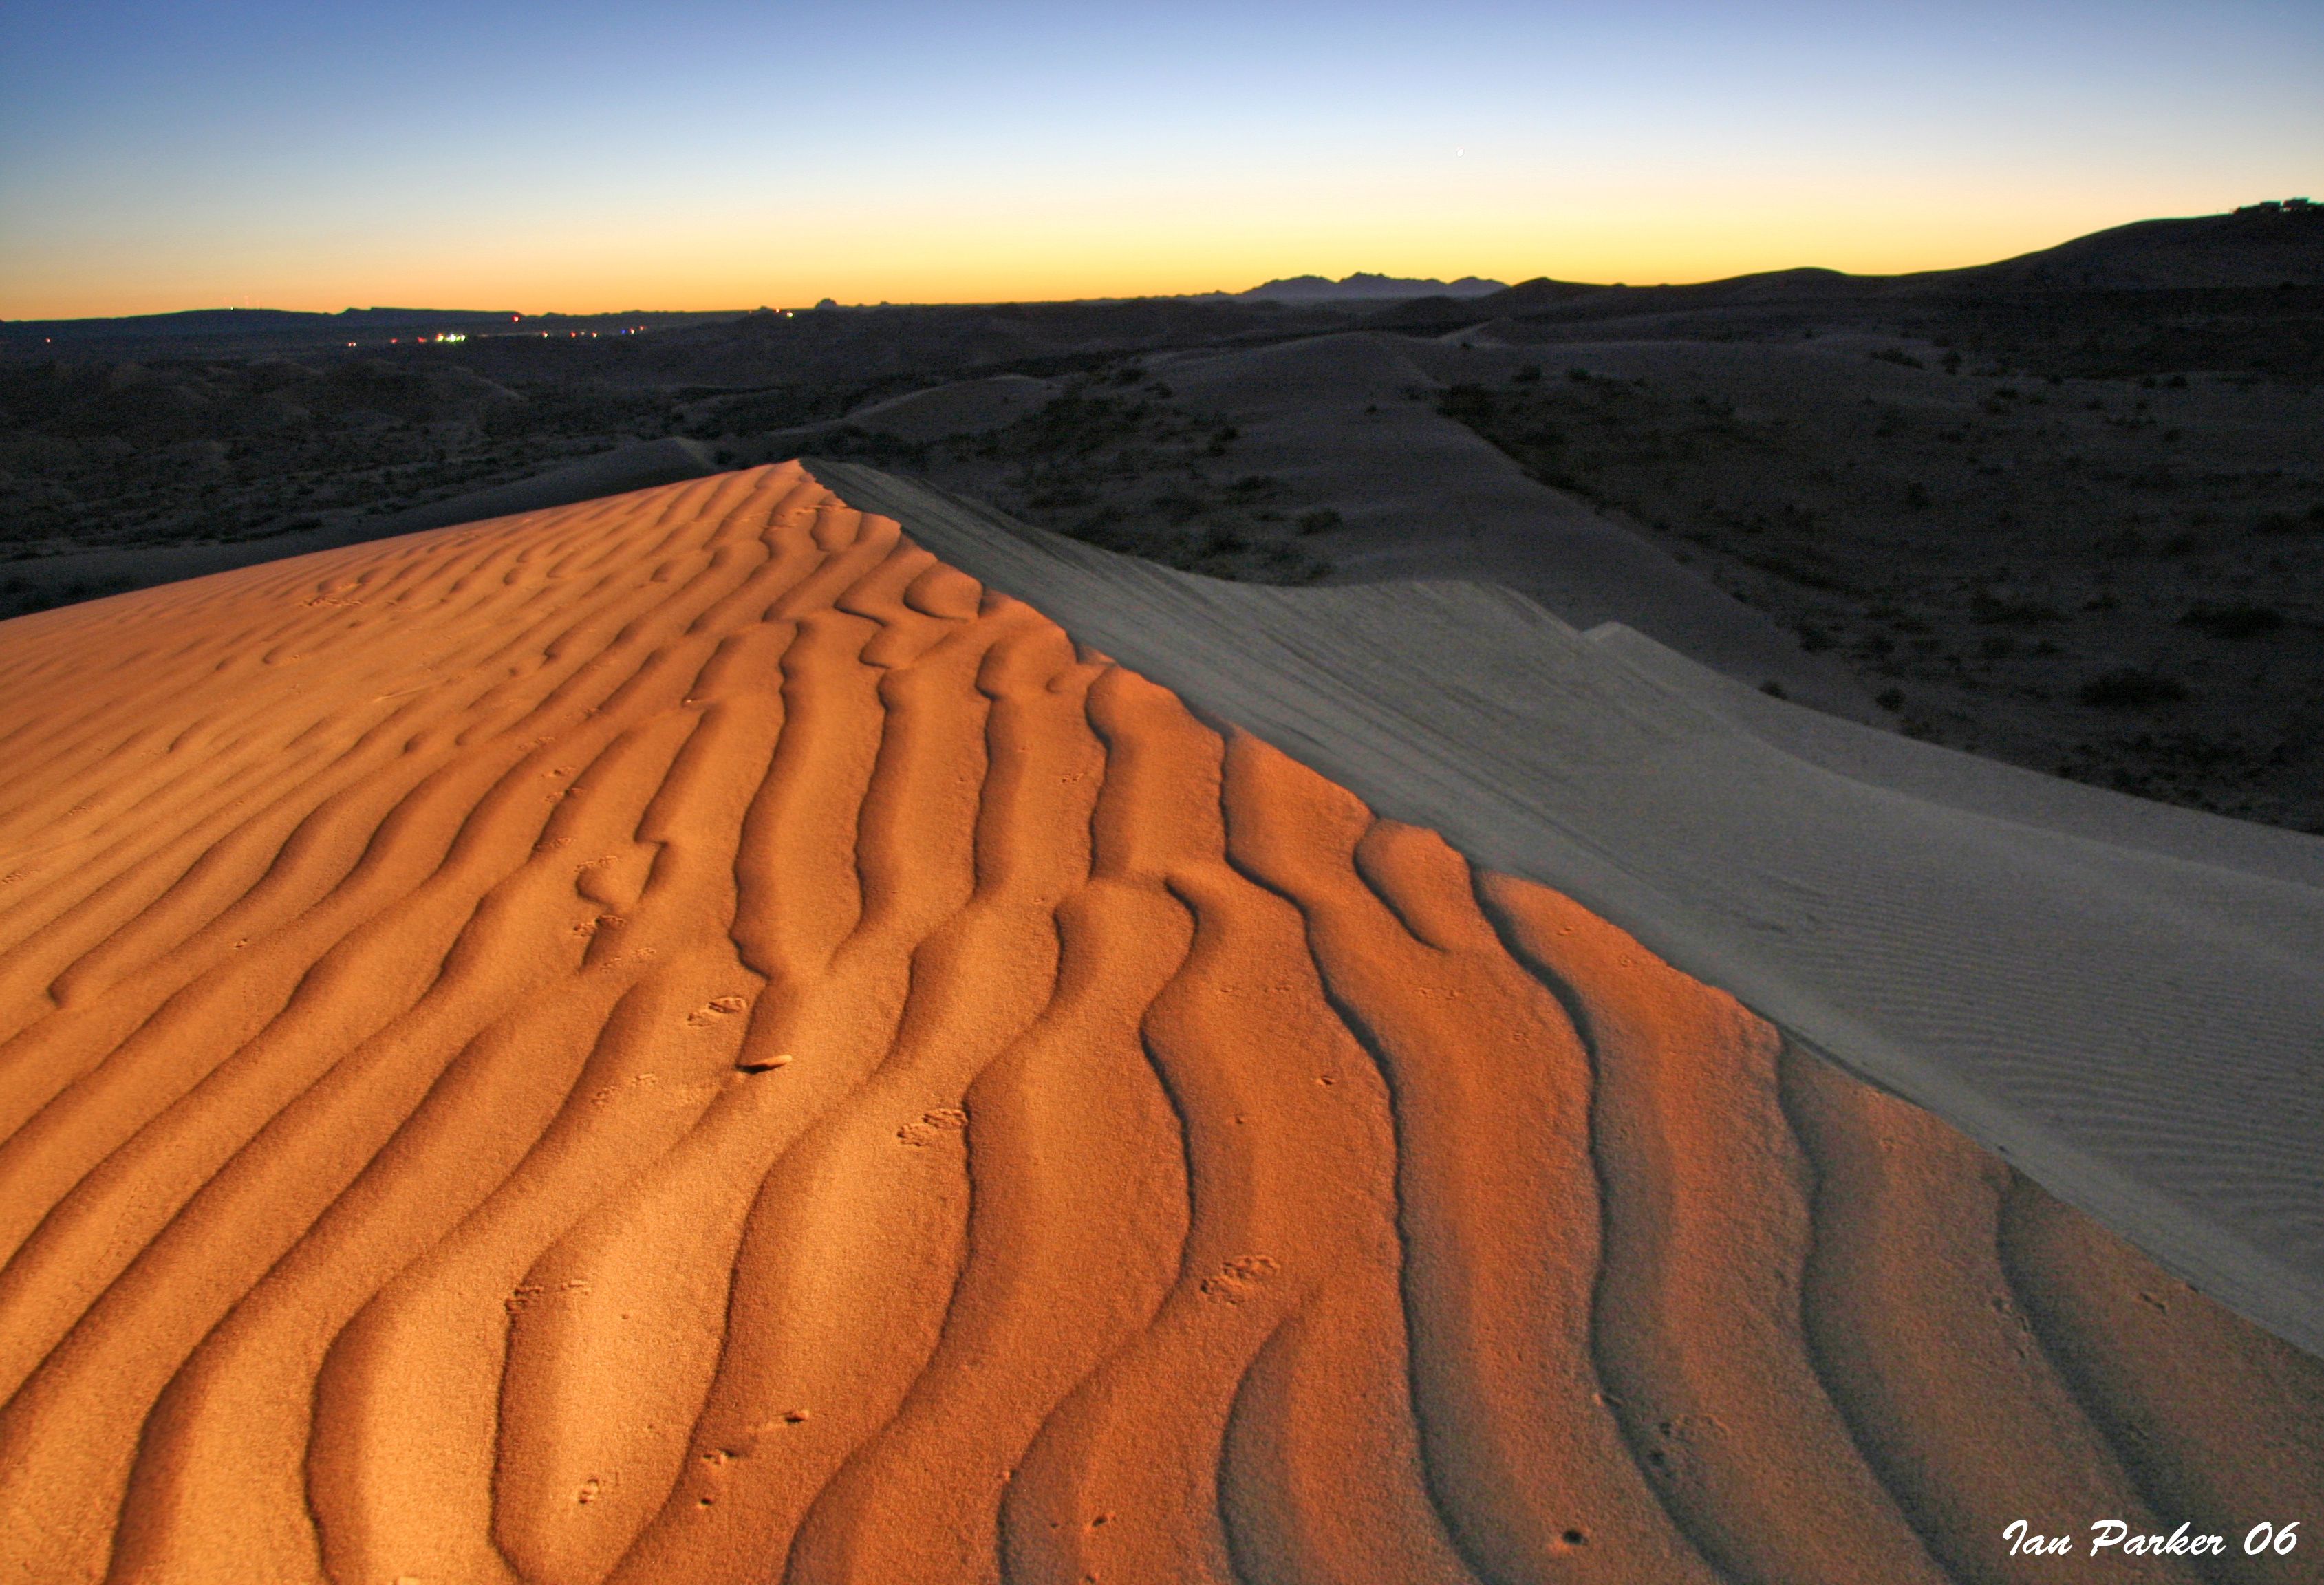 Evanescent Light, Imperial Sand Dunes